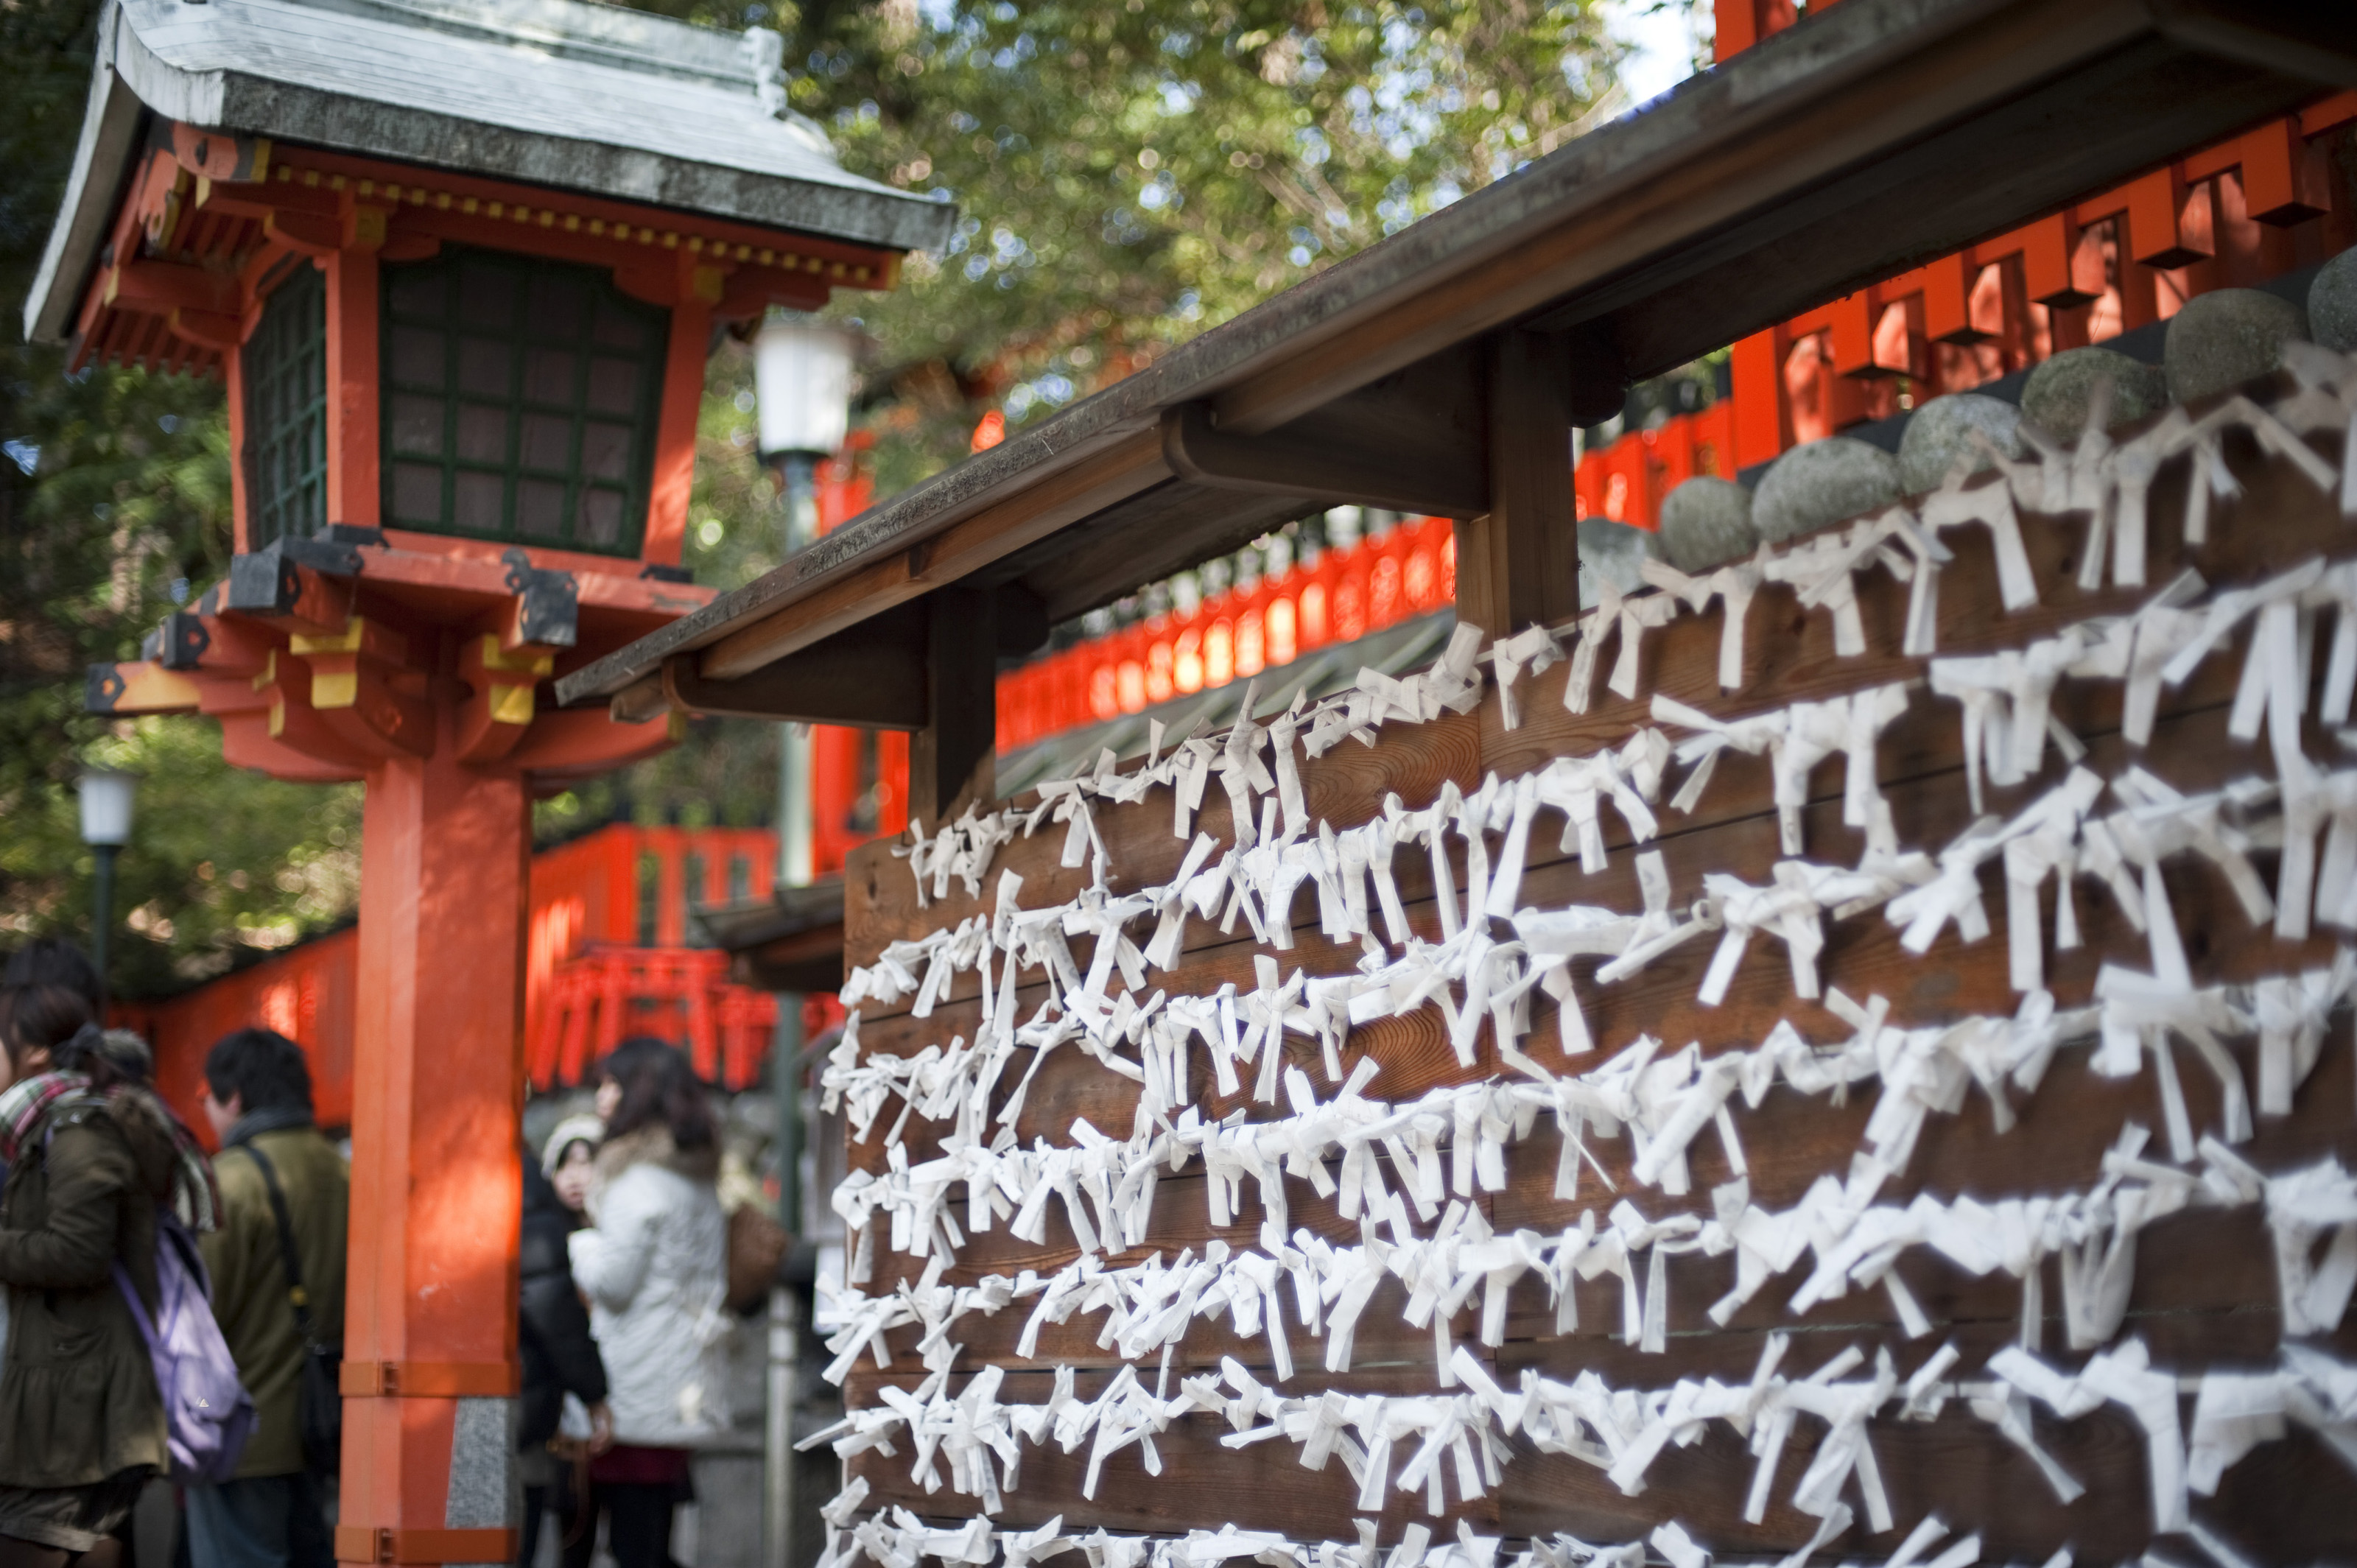 Omikuji with poor results tied to a plank at the shrine. Photo by freeimageslive.co.uk